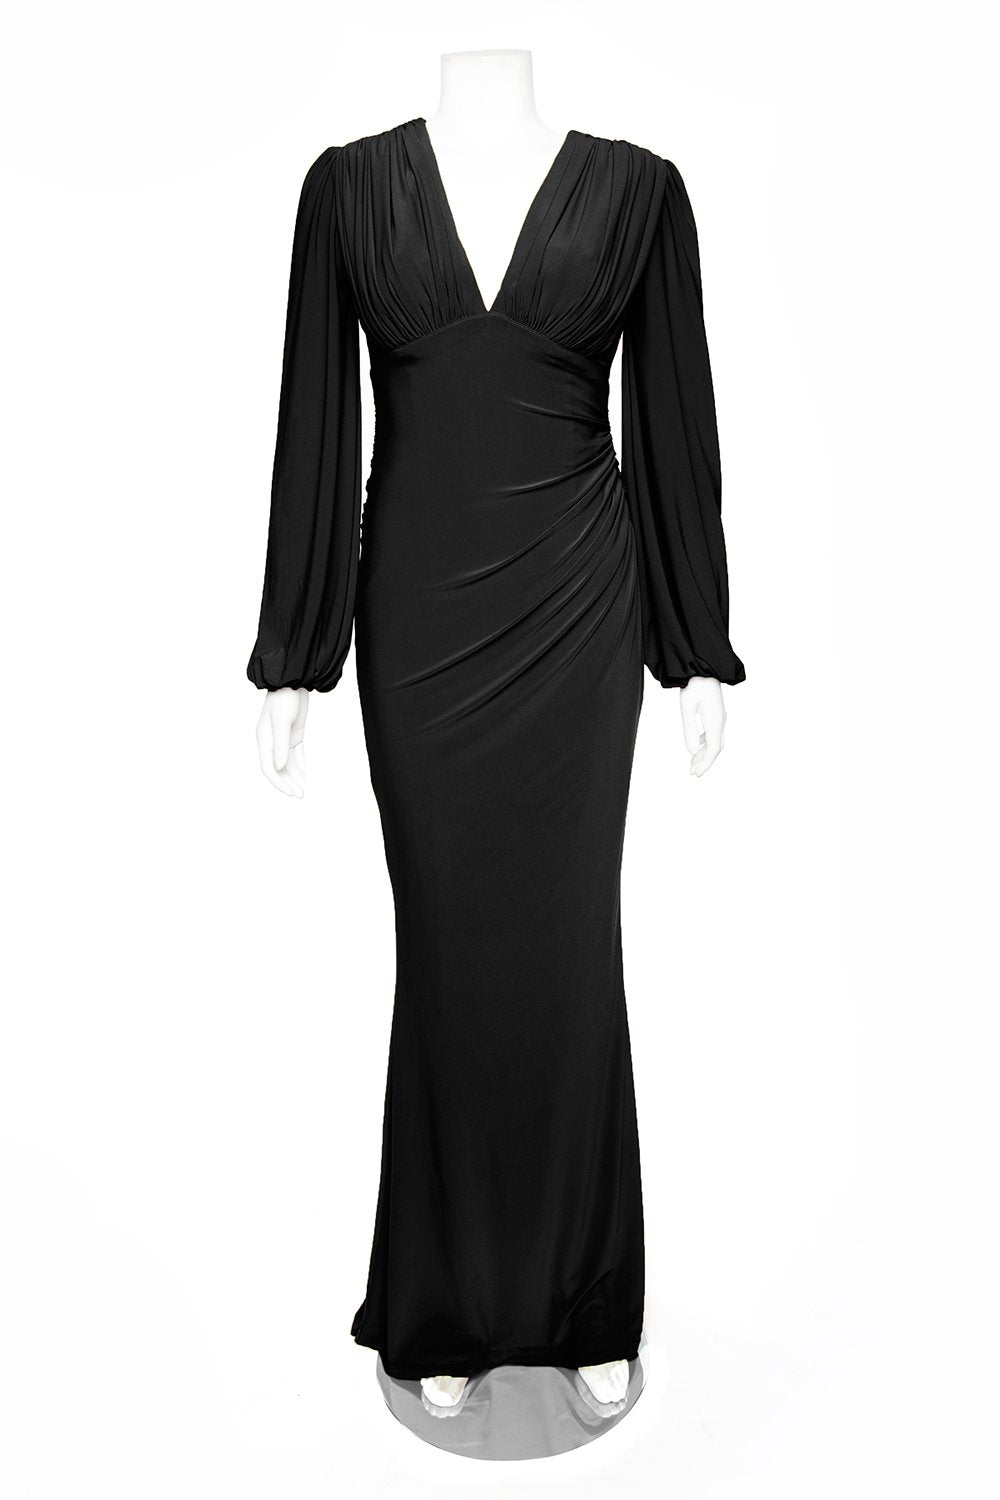 Laura Byrnes California Gia Gown in Black